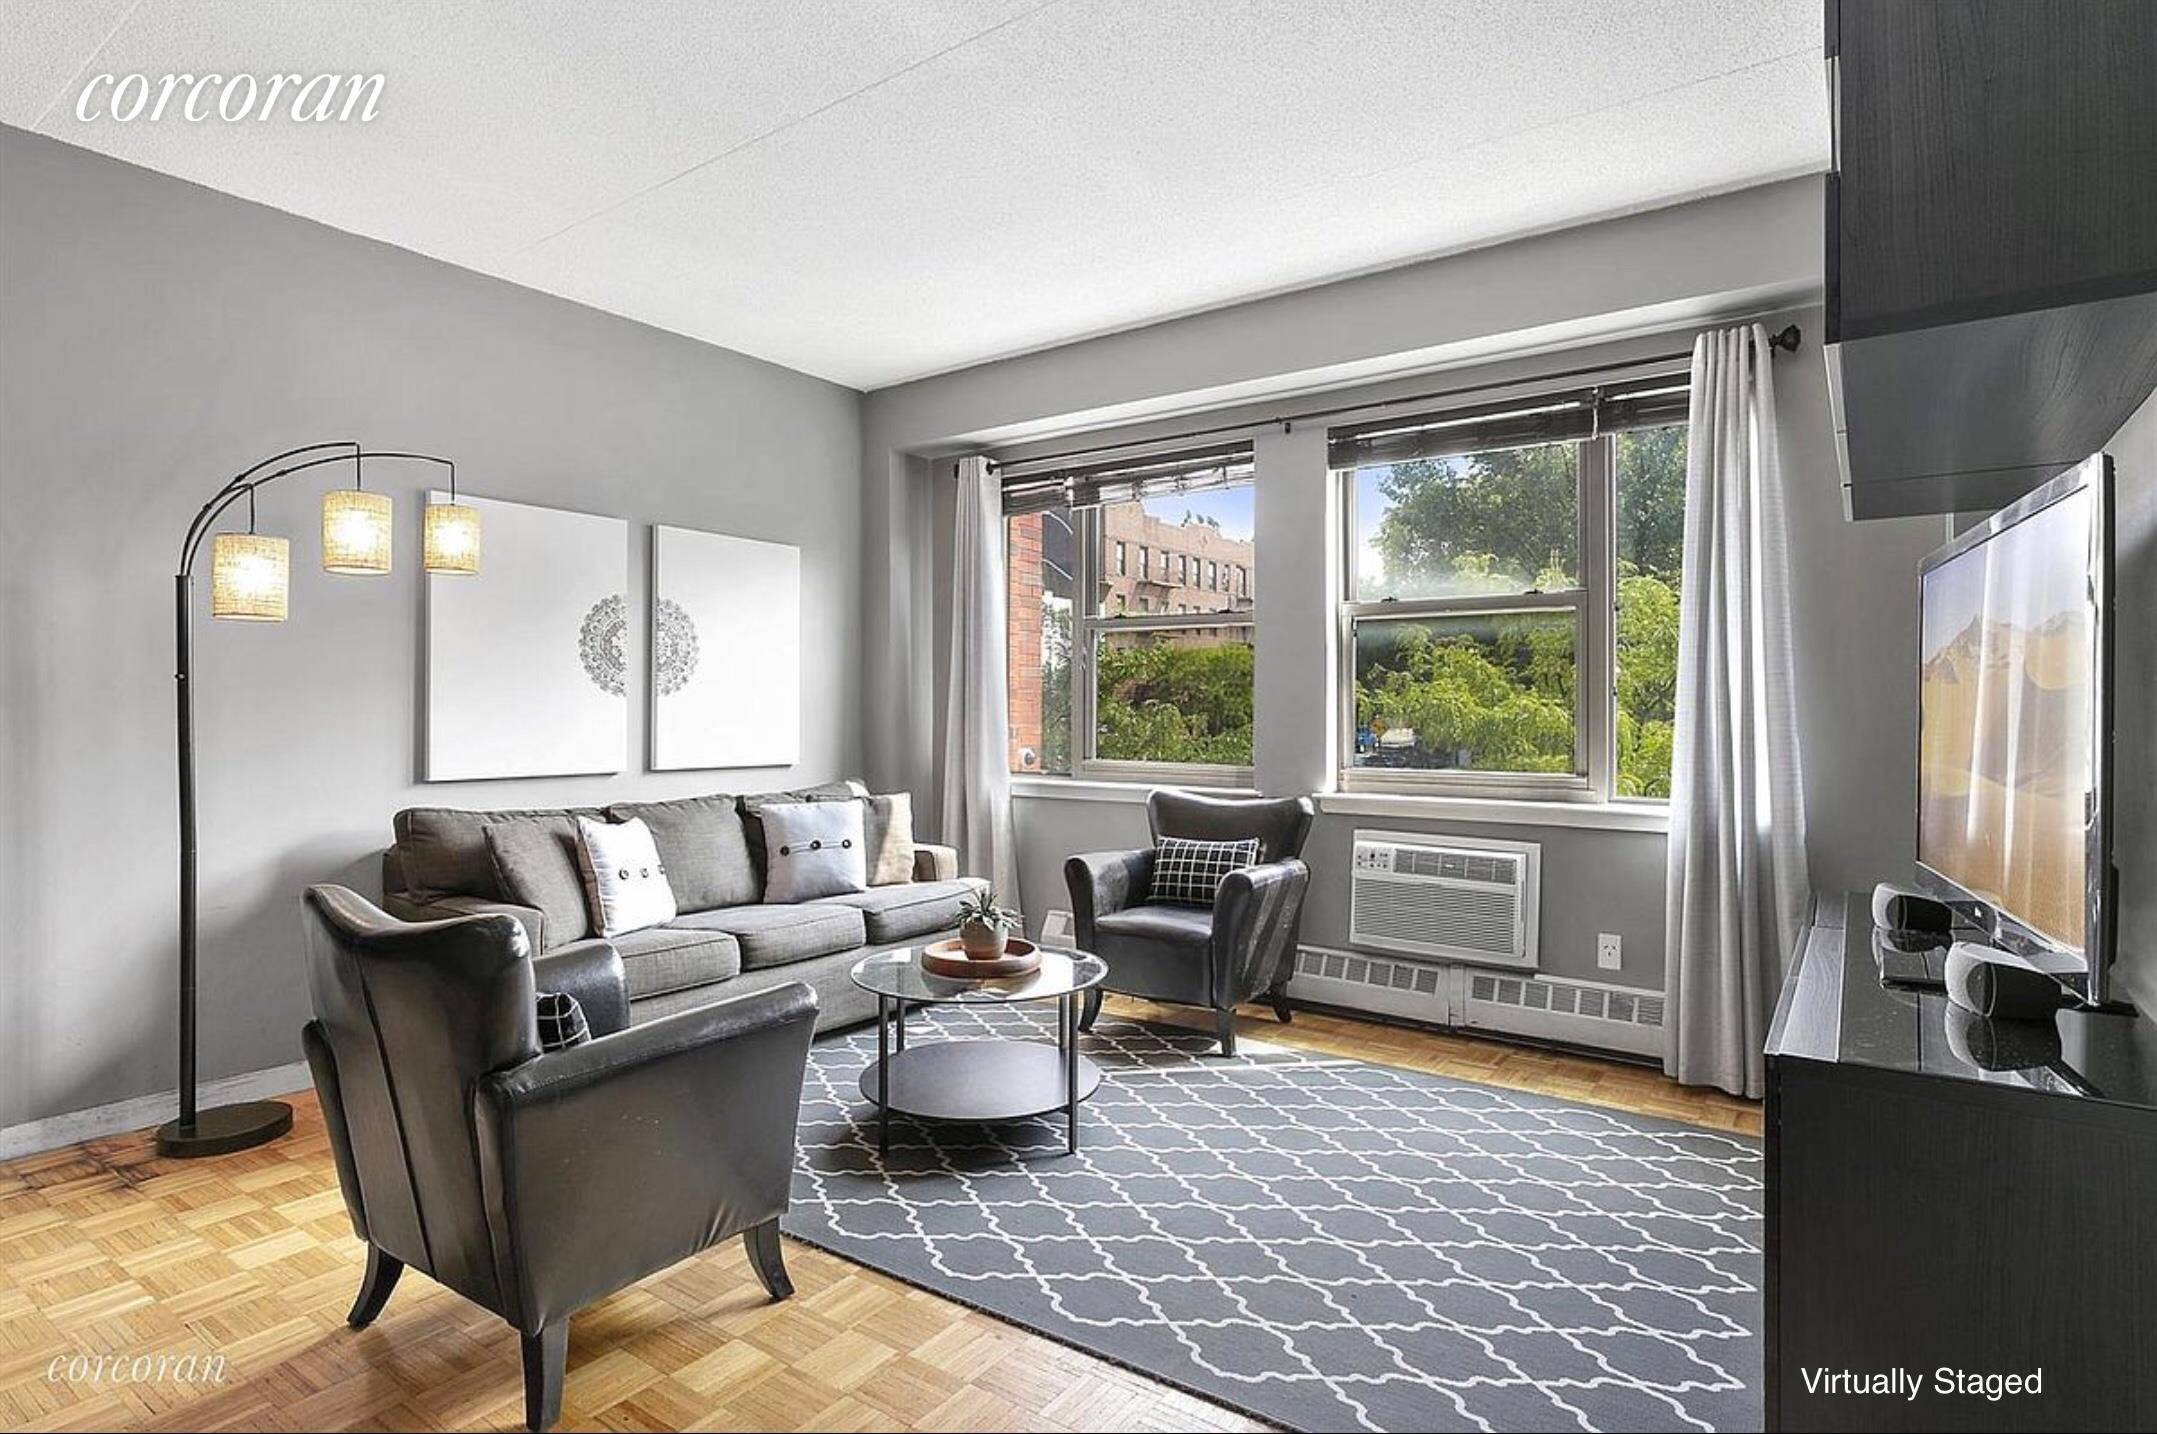 1517 Bergen Street Unit 306 is a bright and spacious two bedroom one bathroom Coop apartment in the popular Crown Heights section of Brooklyn.